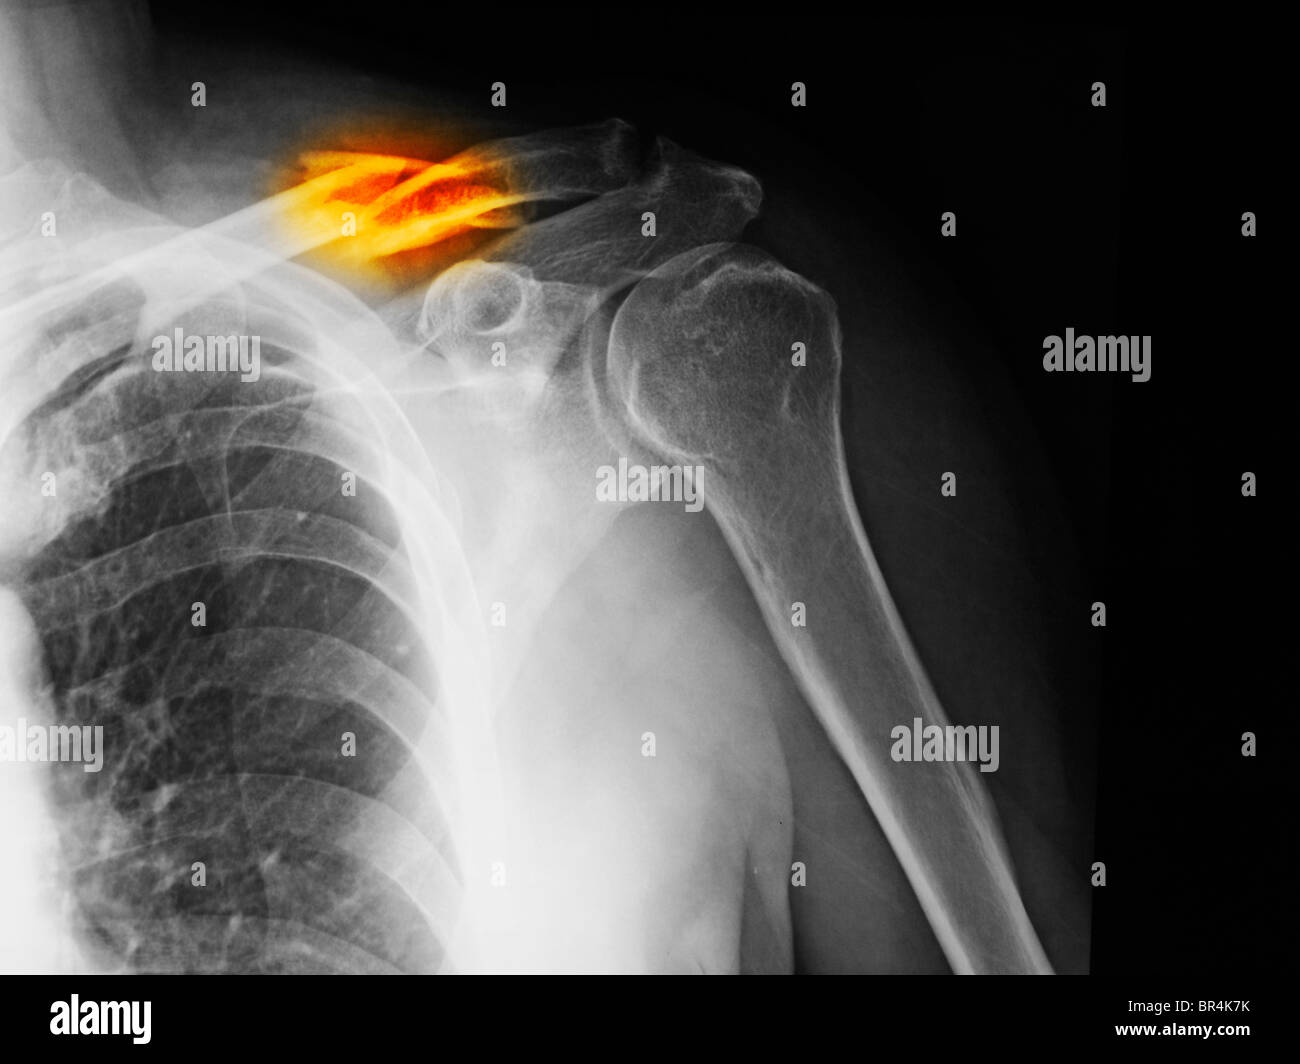 x-ray showing a clavicle fracture Stock Photo